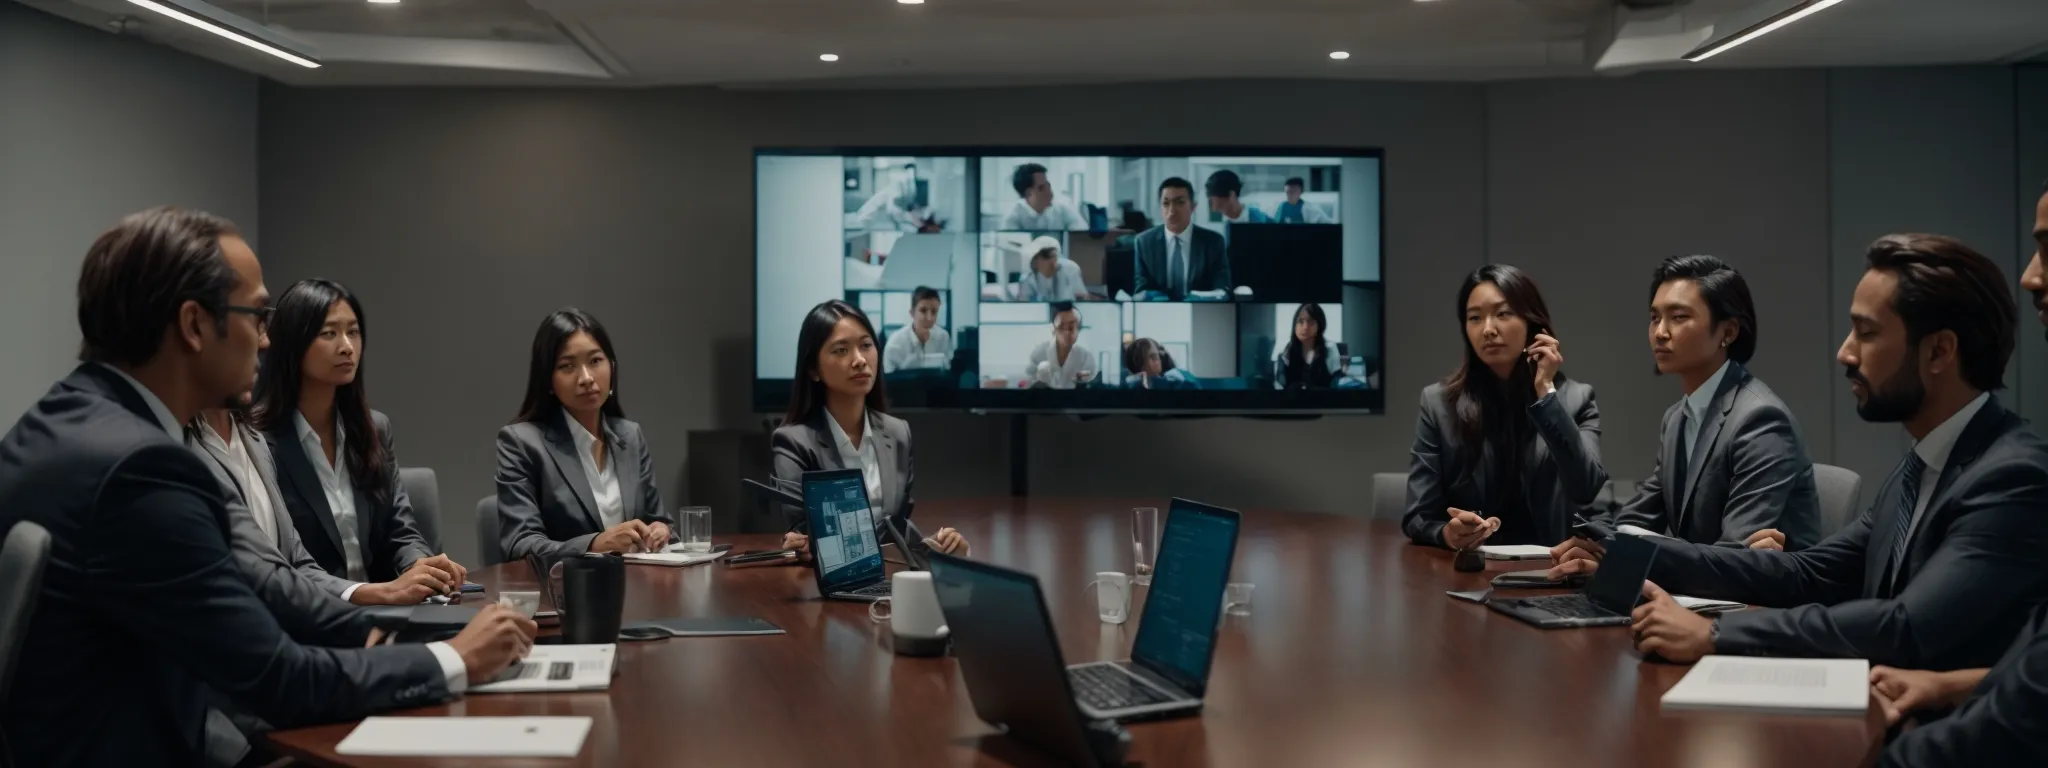 a group of professionals engaged in a video conference on a large screen in a modern office meeting room.